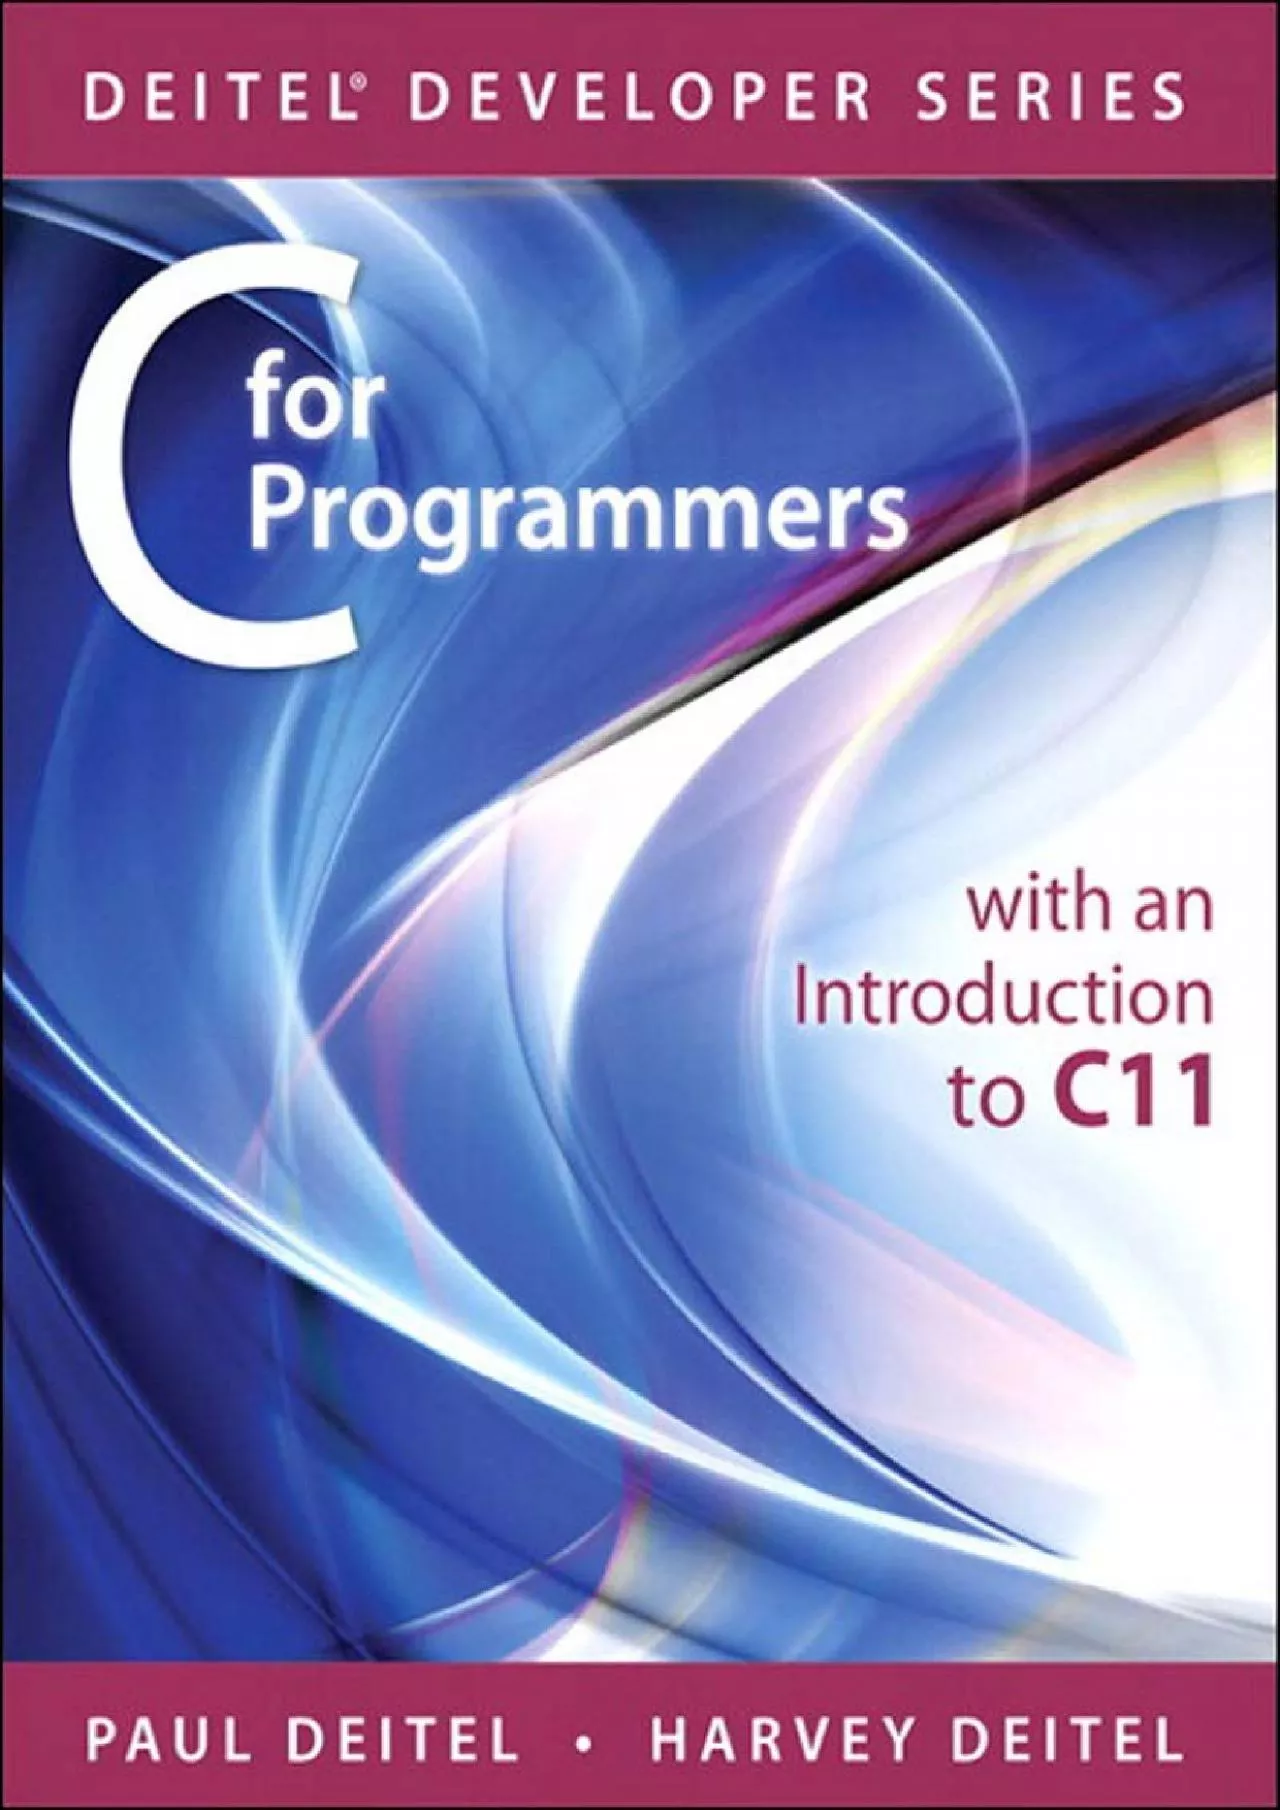 [eBOOK]-C for Programmers with an Introduction to C11 (Deitel Developer Series)